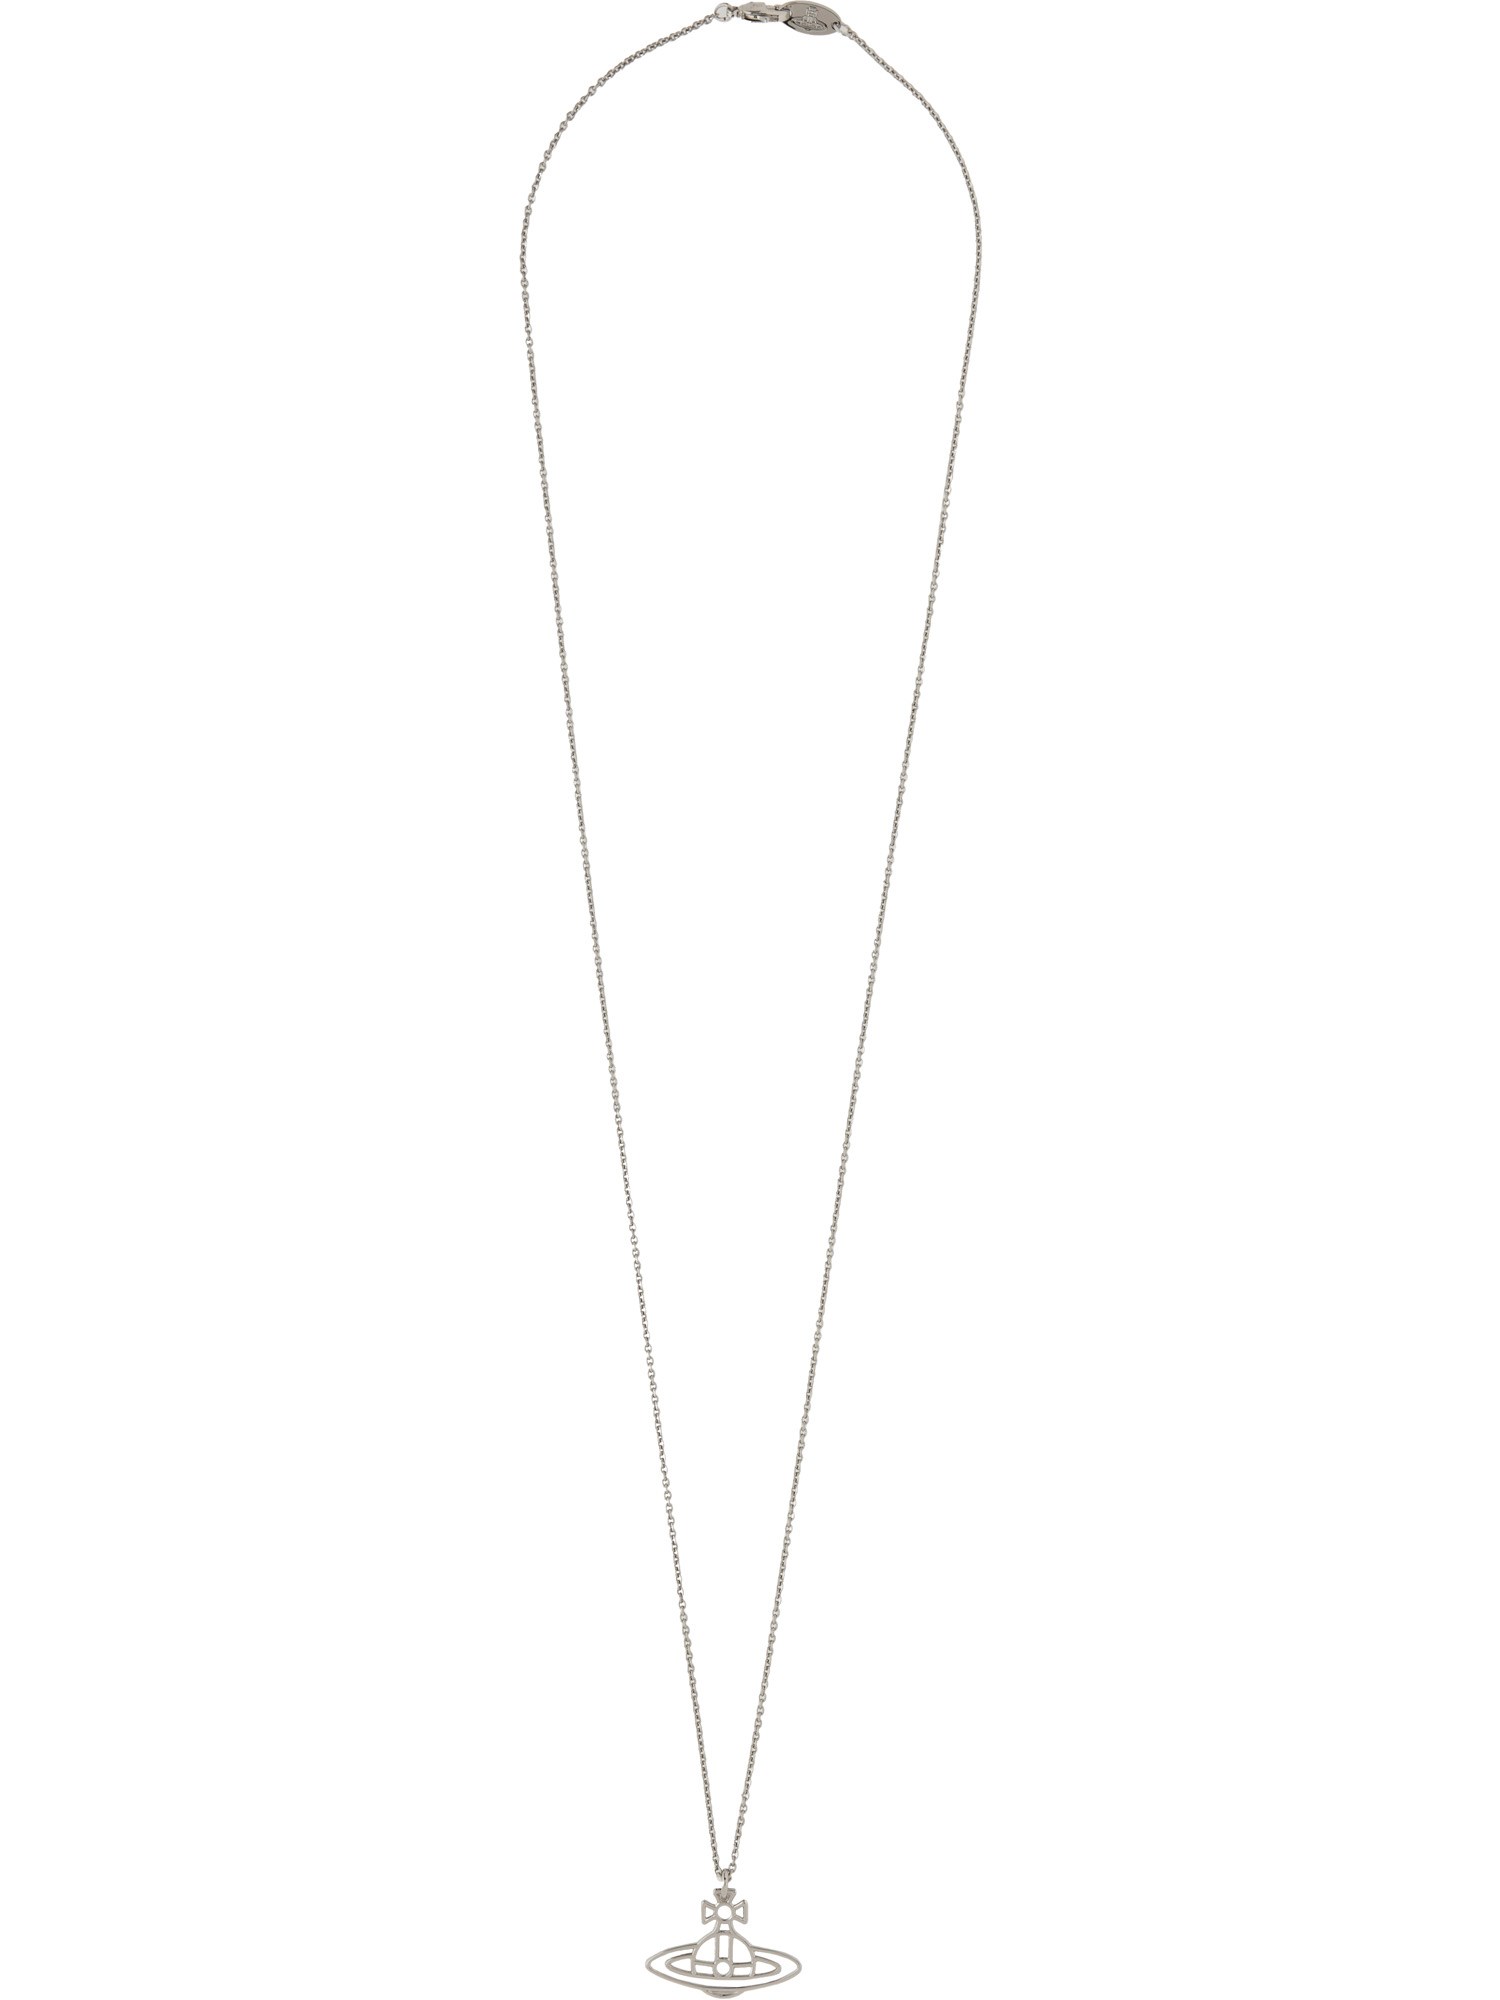 vivienne westwood thin necklace with orb pendant